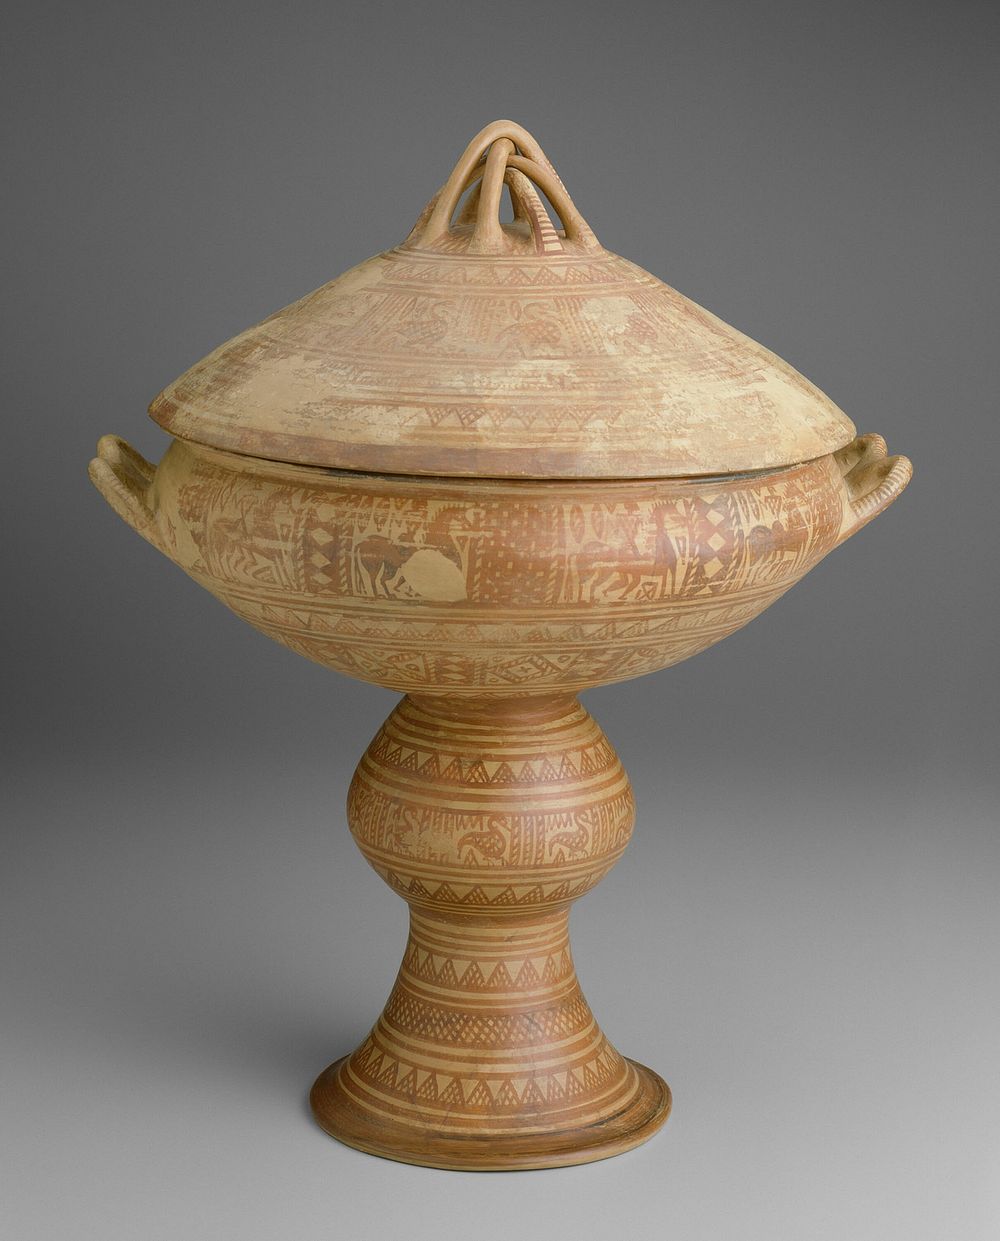 Lebes (Stemmed Bowl with Lid) by Ancient Etruscan